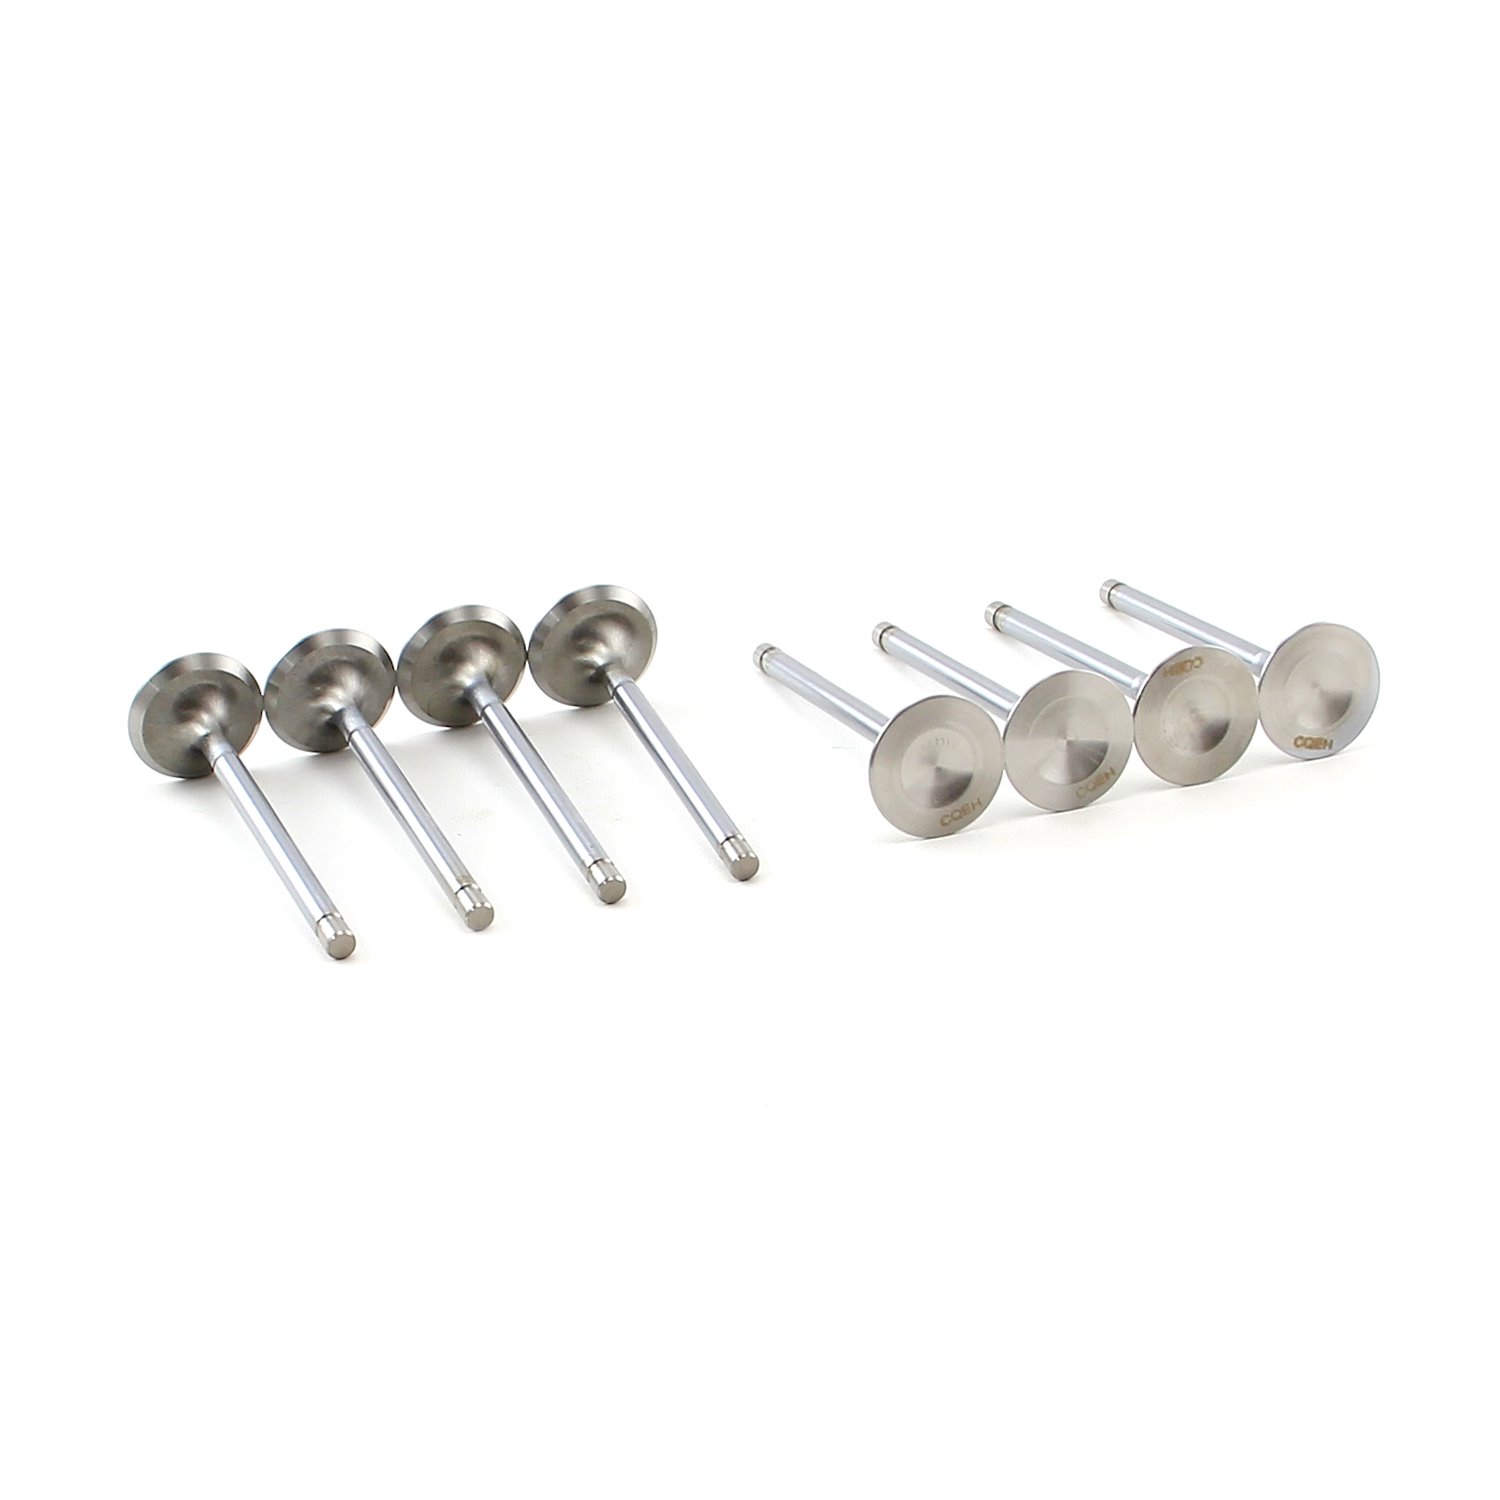 Ford 429 460 1.760 +100 11/32 Stainless Steel Exhaust Valves Set 8Pcs